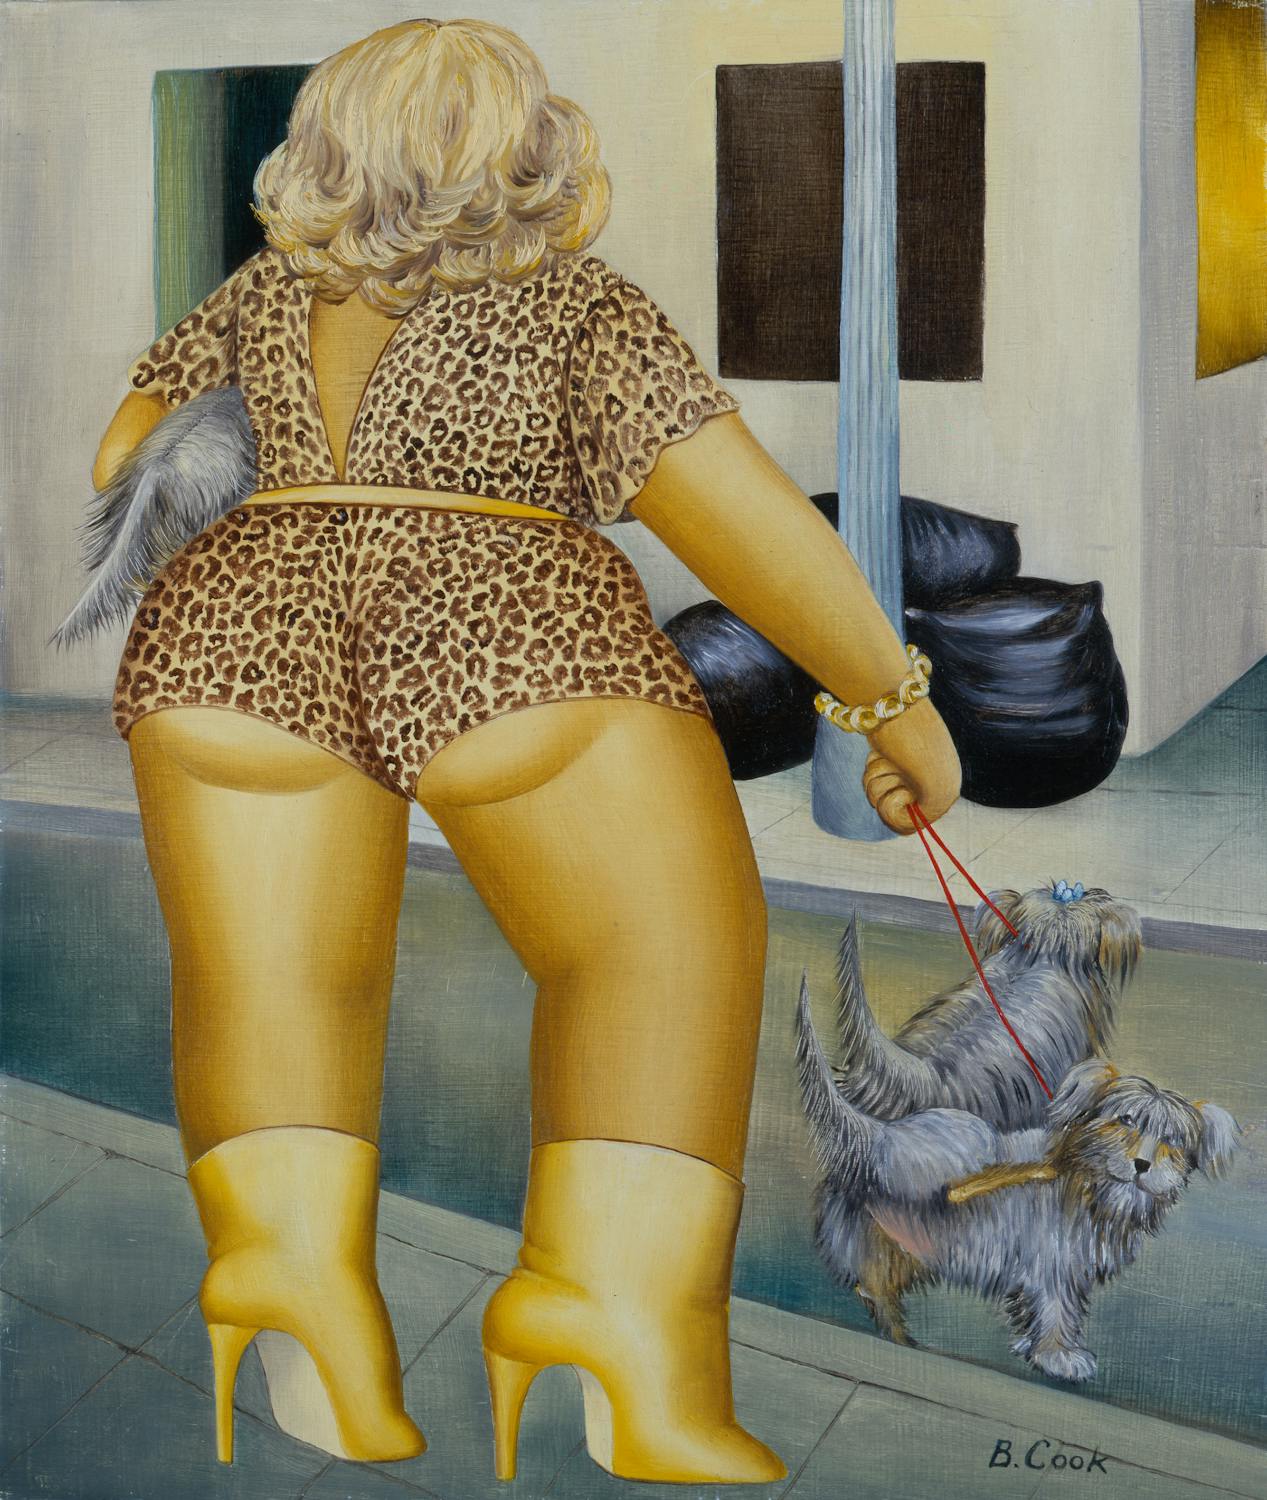 A colourful painting of a women facing away from the viewer, wearing a revealing leopard print jump suit and high-heeled boots. She is walking two small grey dogs and is carrying a thiurd under her arm. In the background, viewers can see a street corner with a lamppost and rubbish bags.